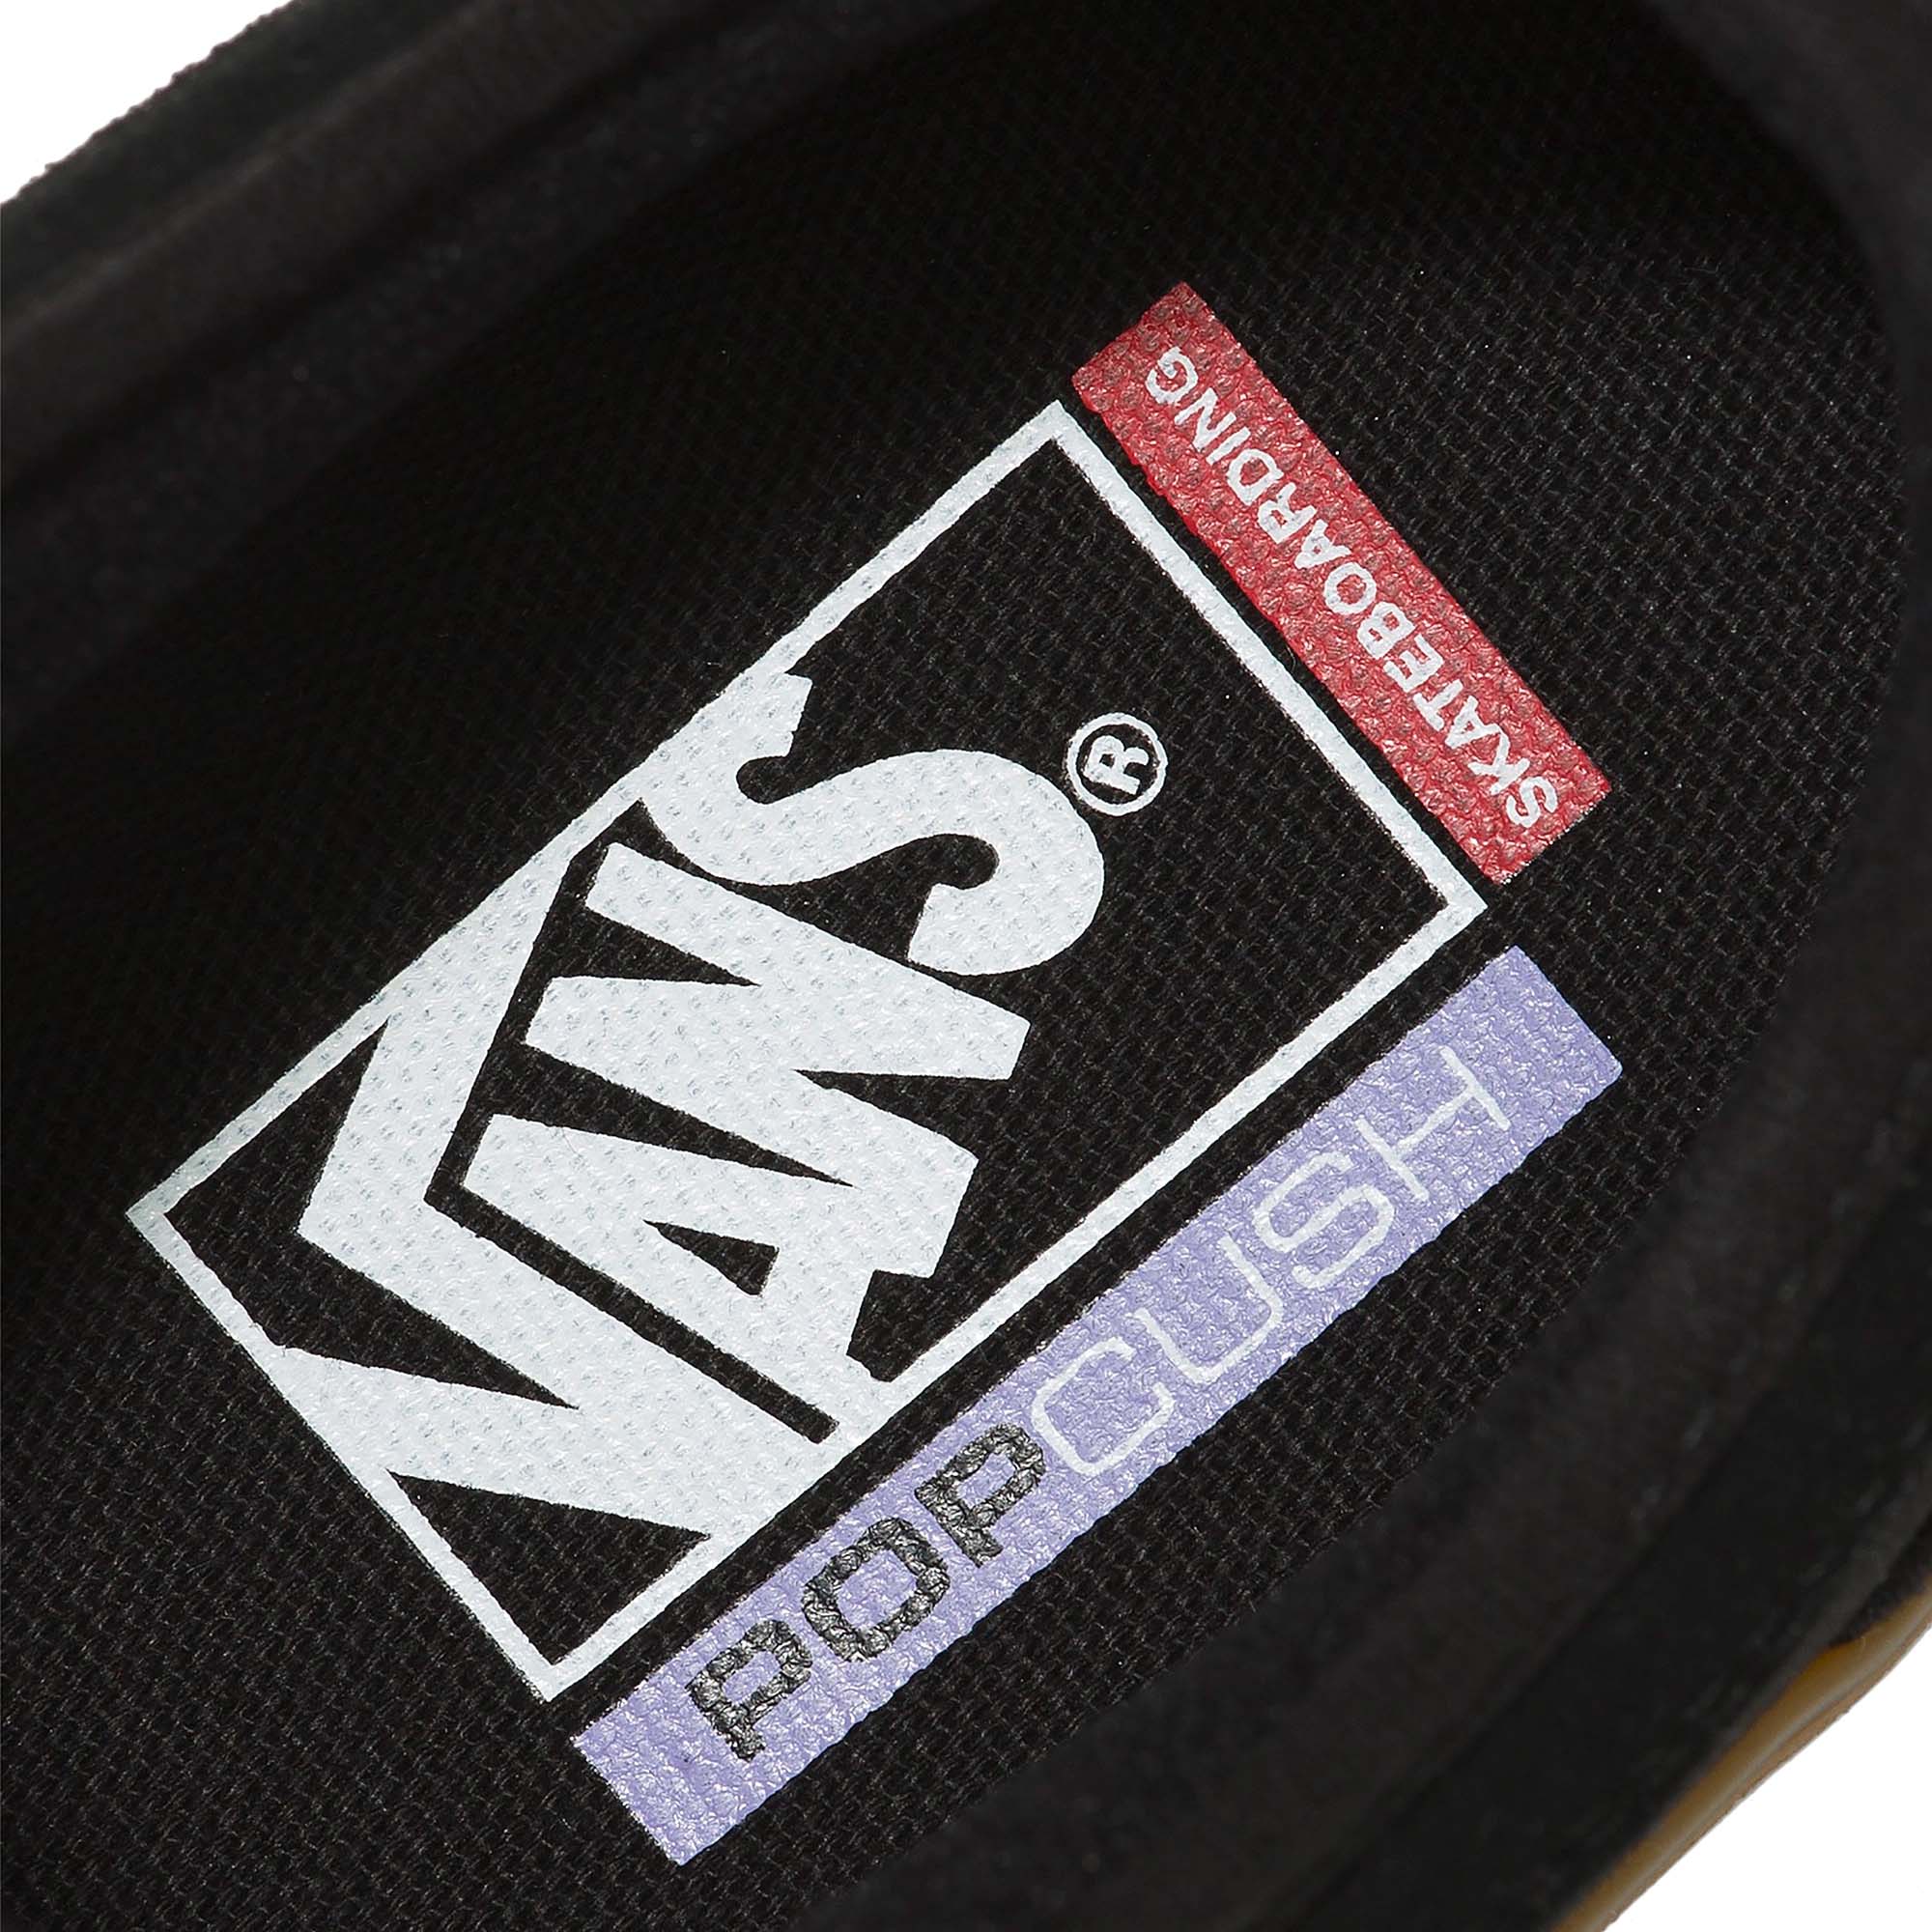 Vans Chukka Low Skate Shoes/Trainers